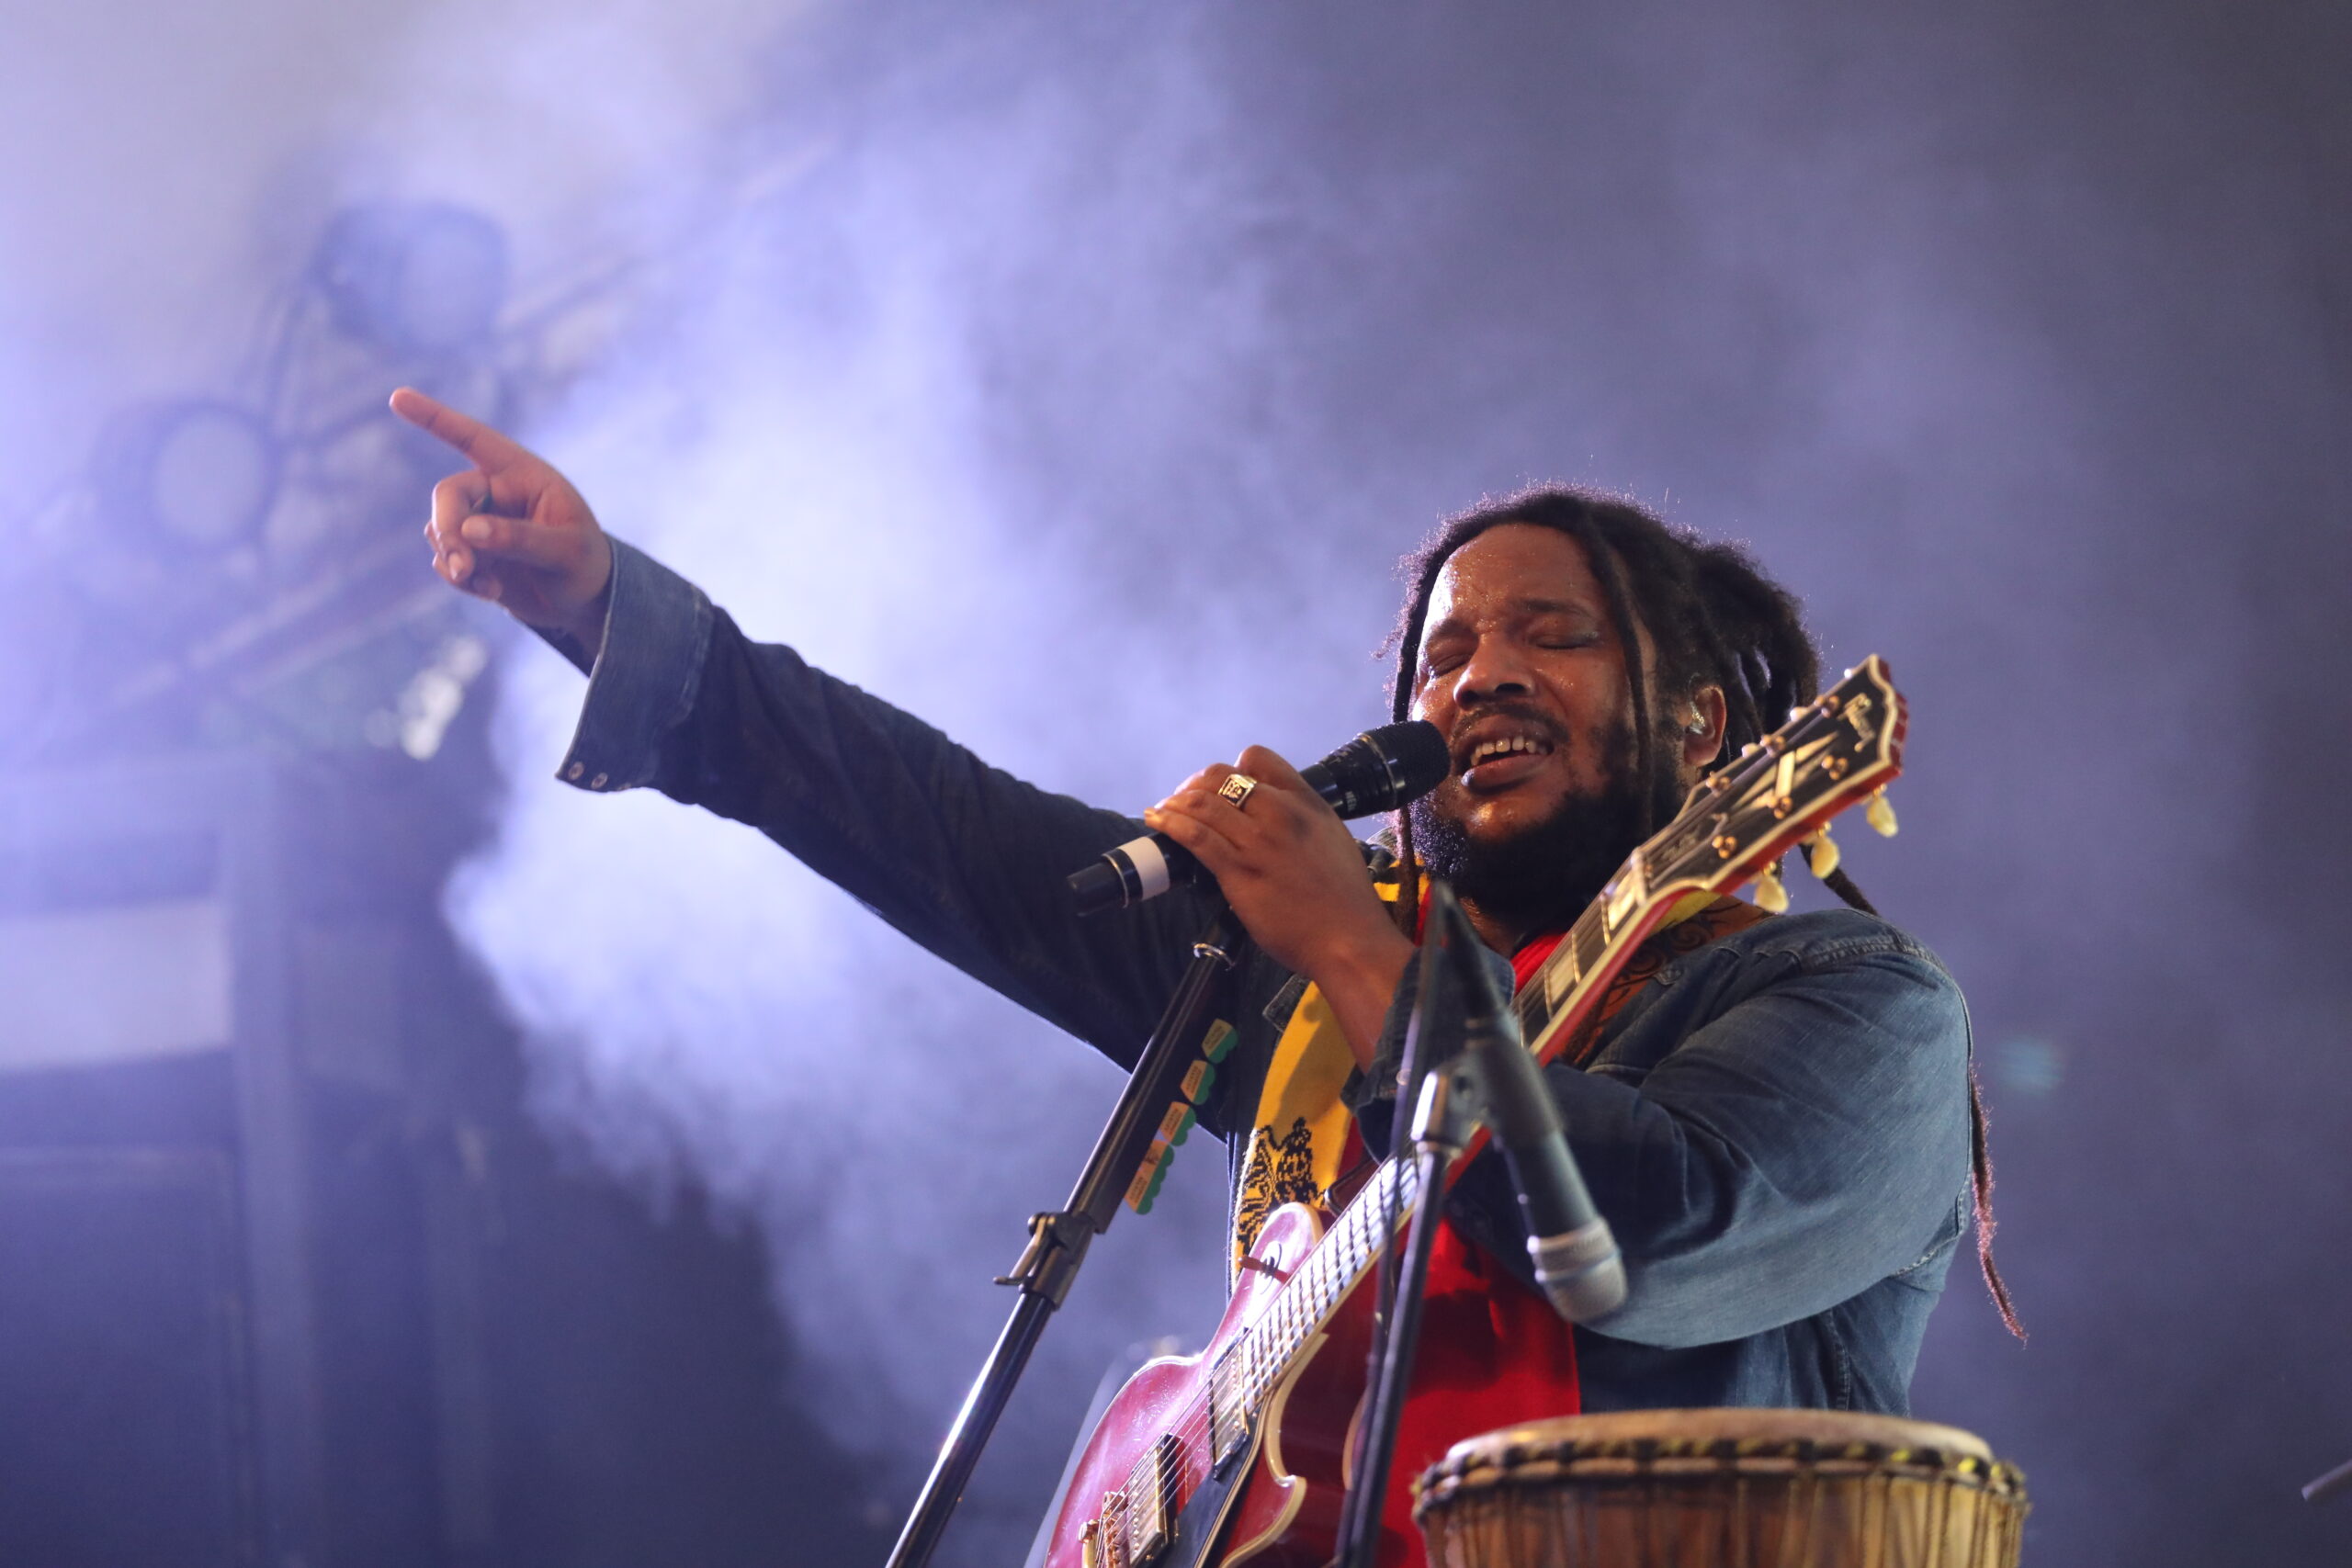 Eight-time Grammy award winning singer, musician and producer Stephen Marley performs at WHBPAC on July 10. COURTESY WHBPAC